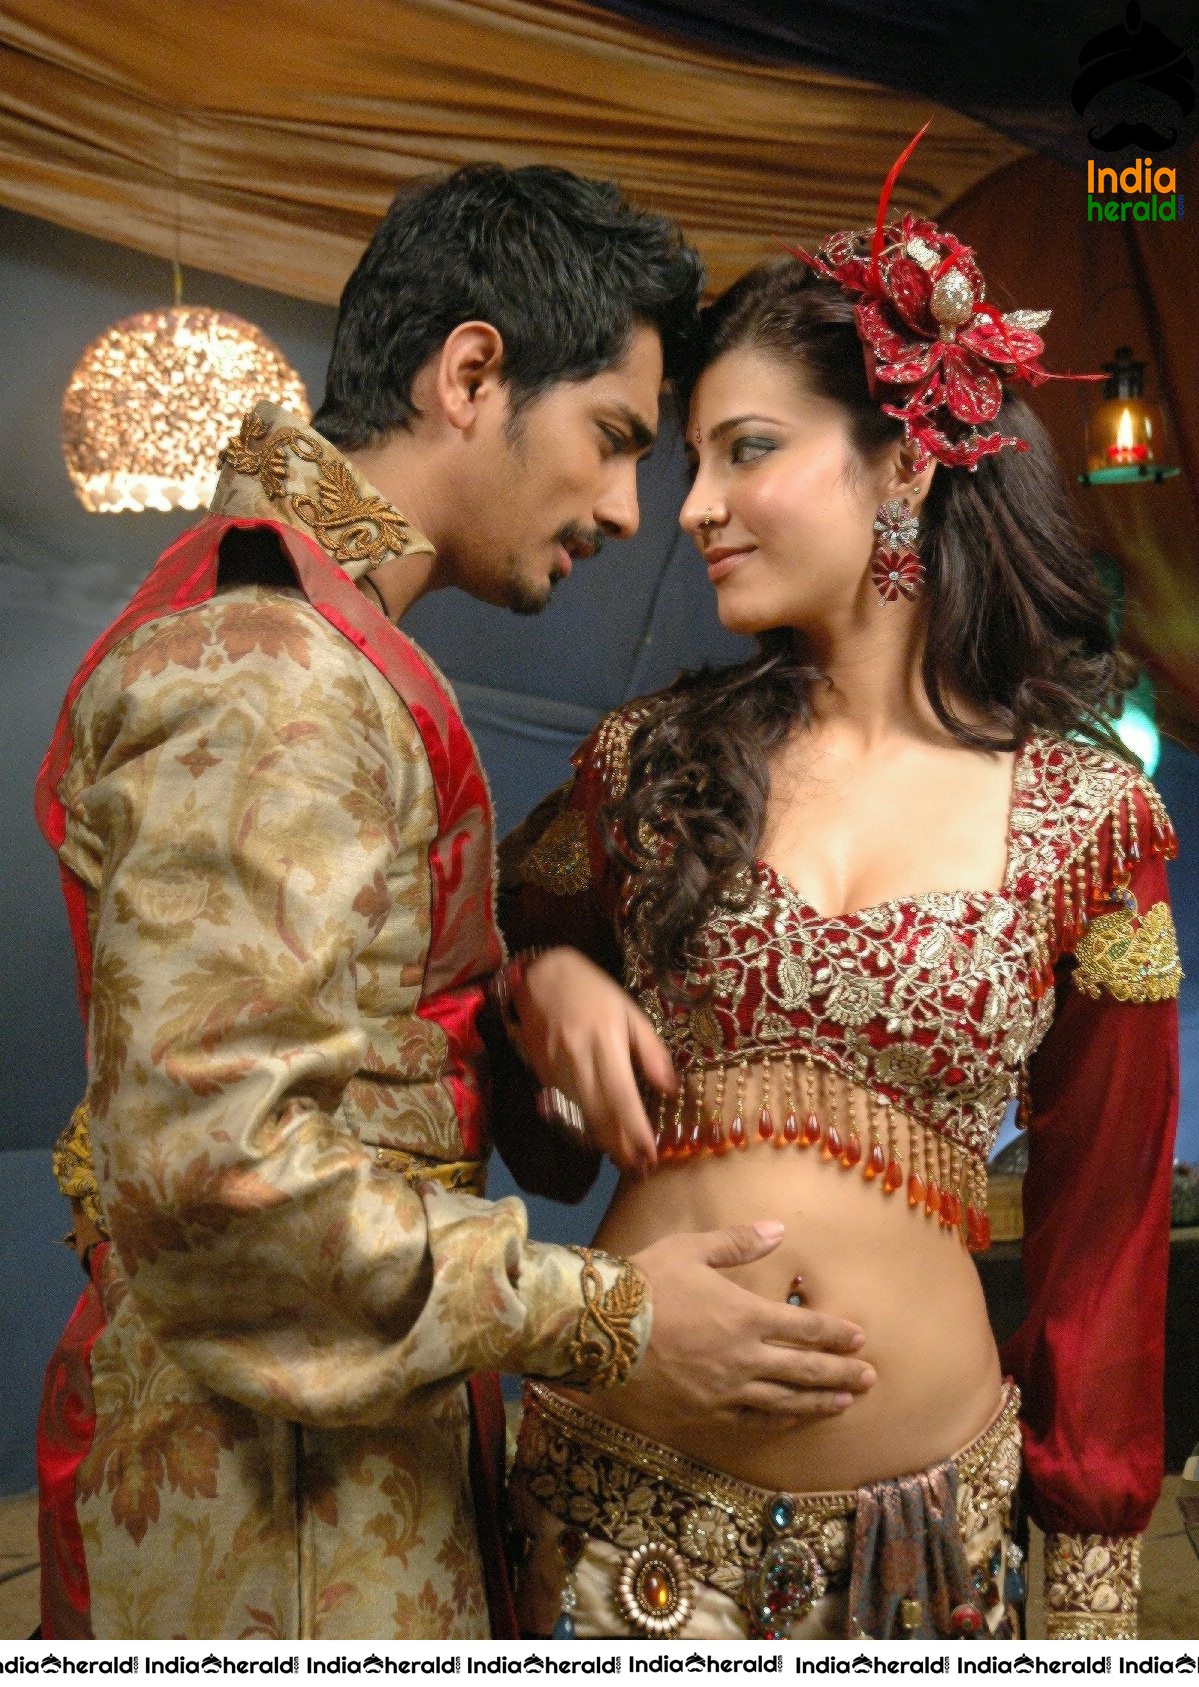 Shruti Haasan Hot Photos where her Belly and Navel are enjoyed by Actor Siddharth